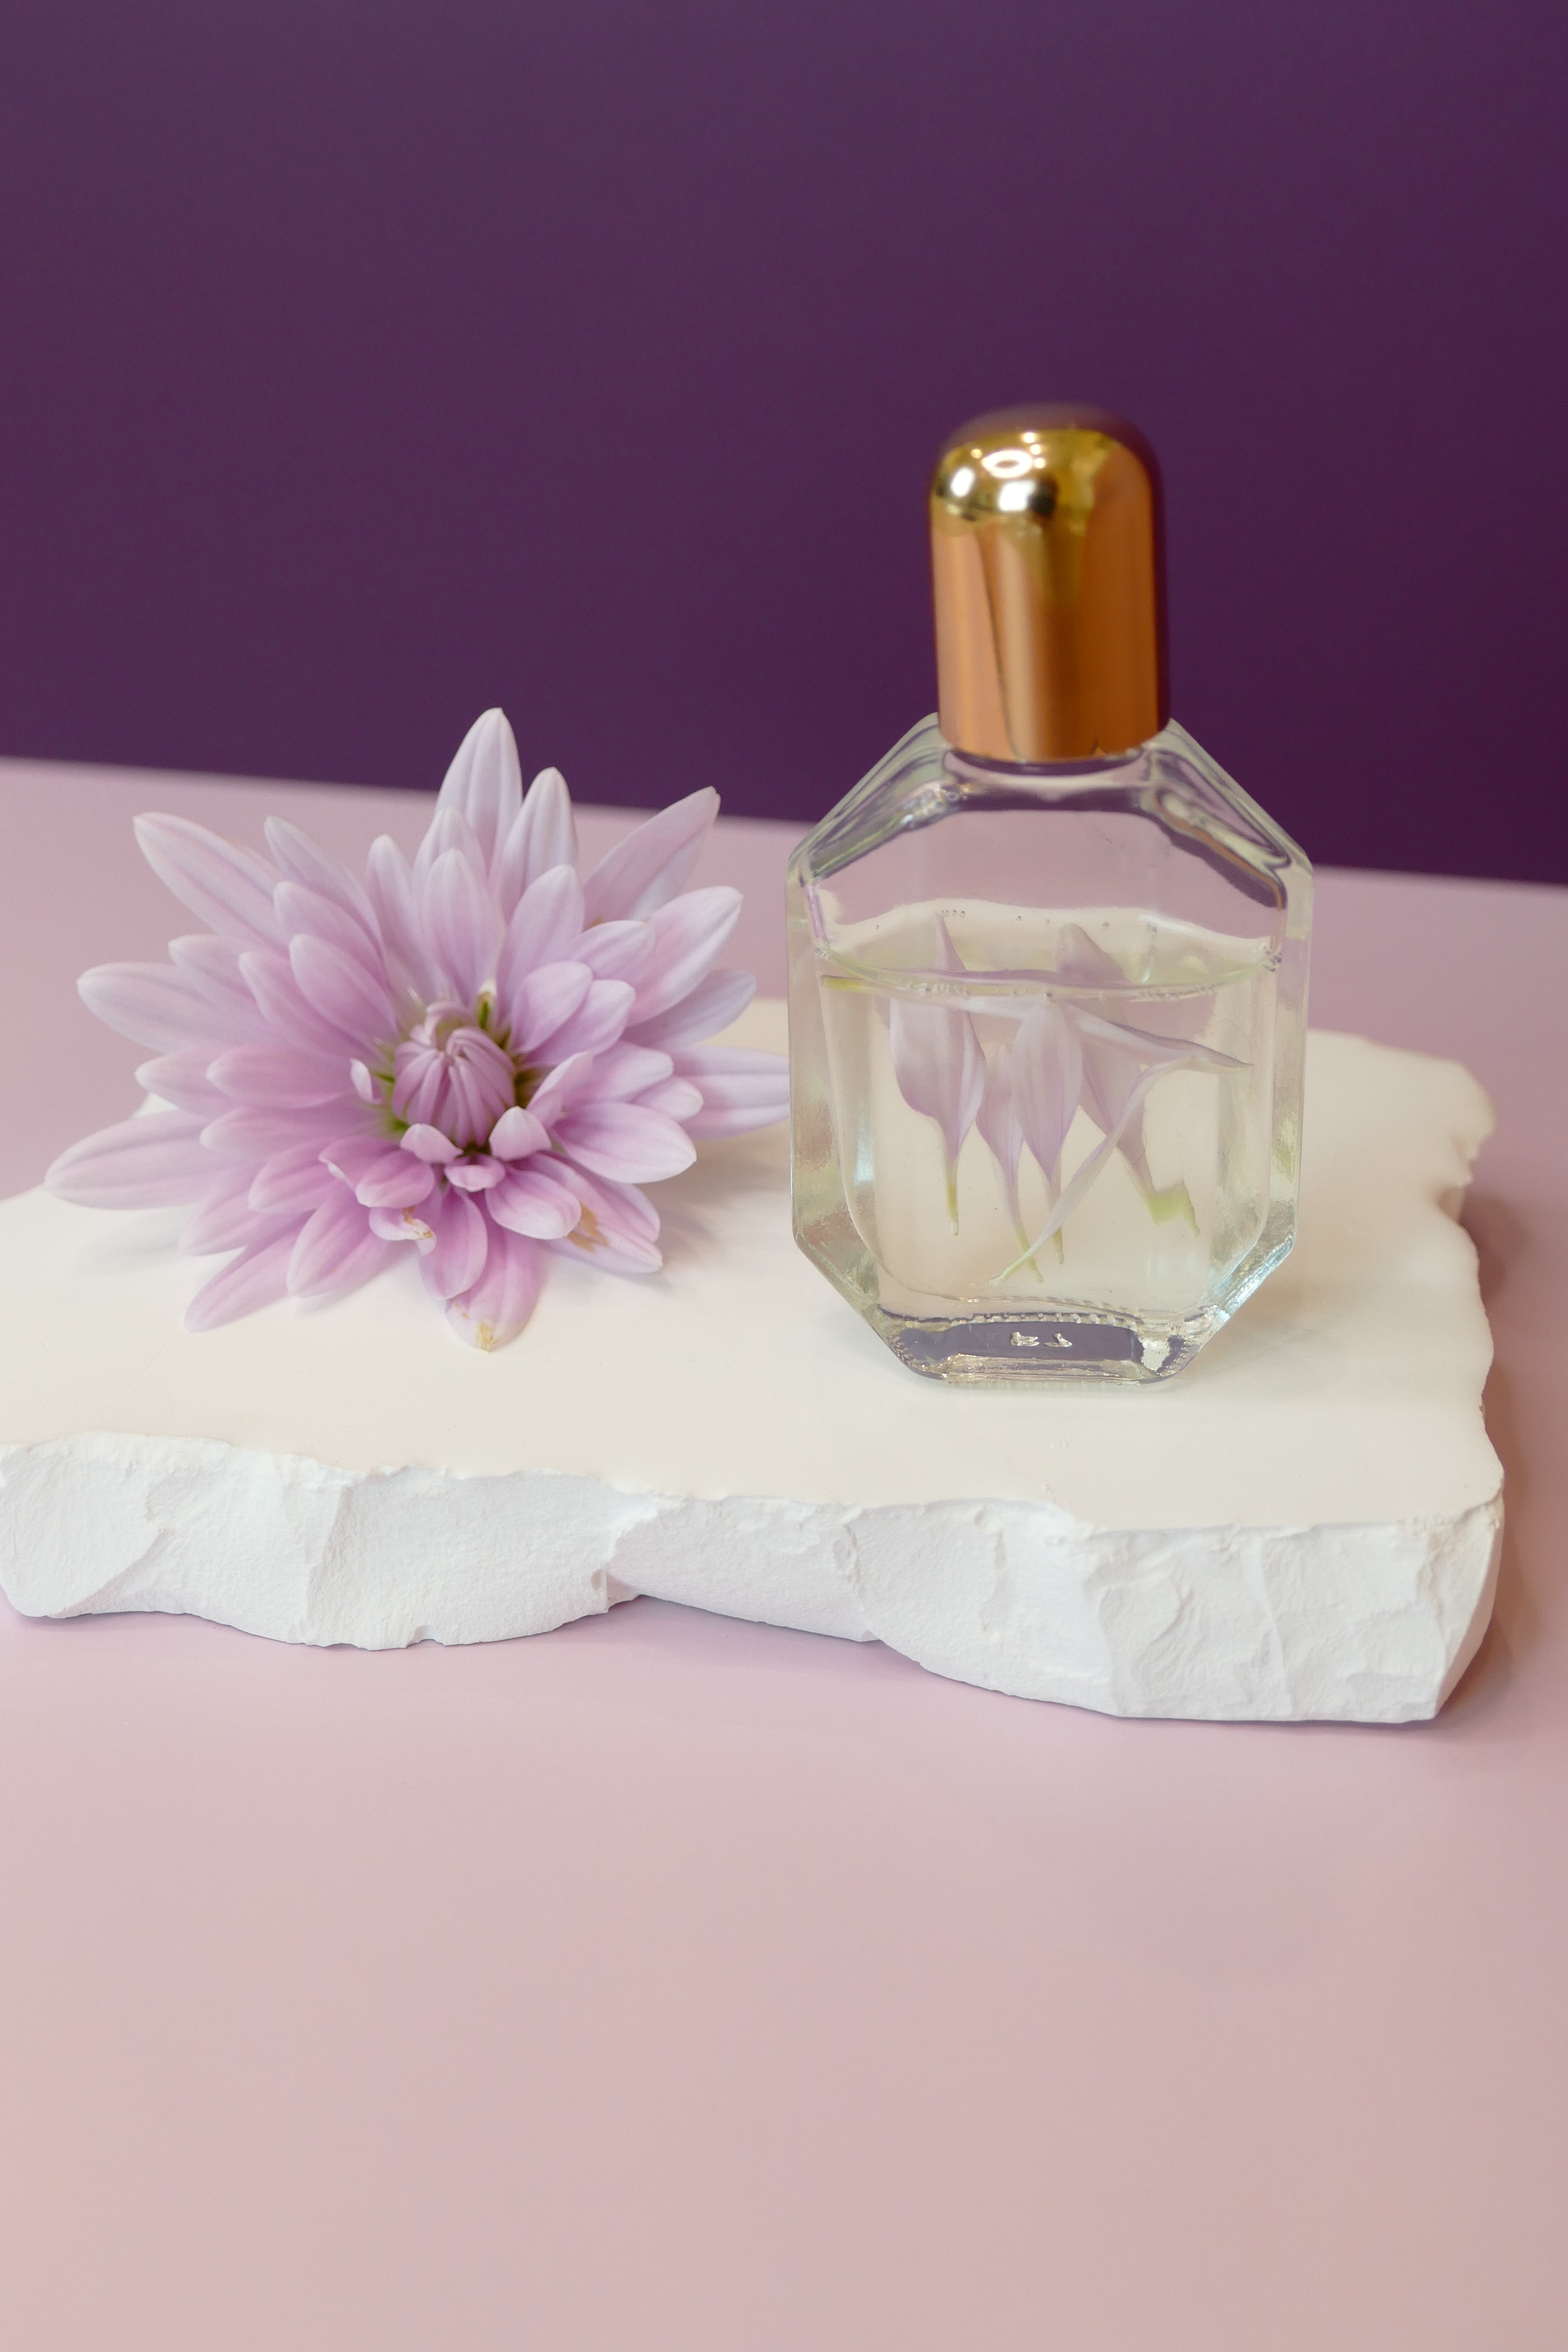 Purple background with flower and glass roller bottle.